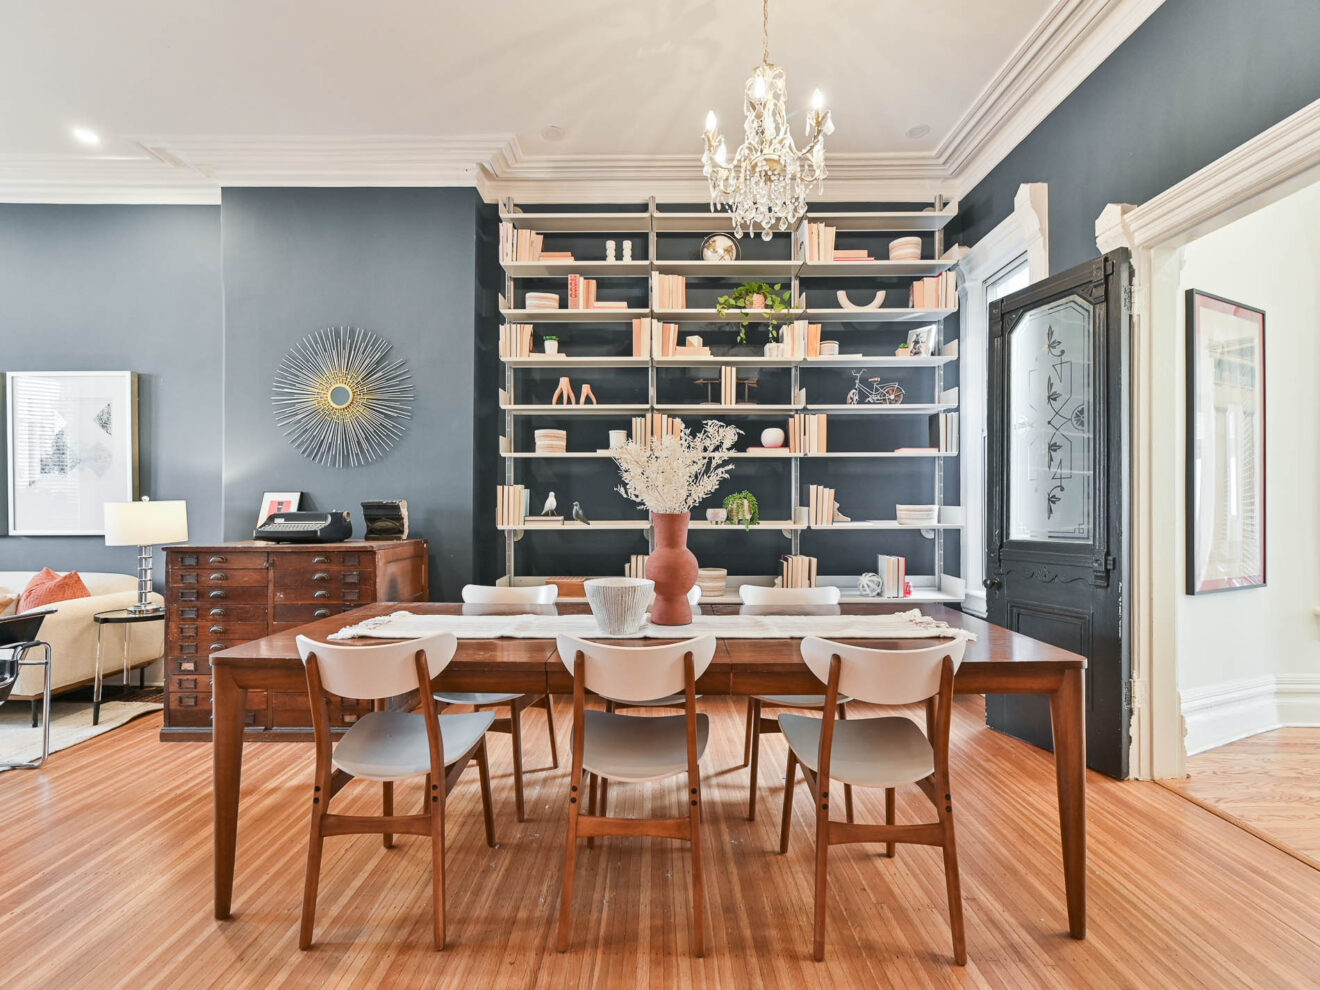 Dining Room of 99 Willcocks Street featuring beautiful built-in shelves